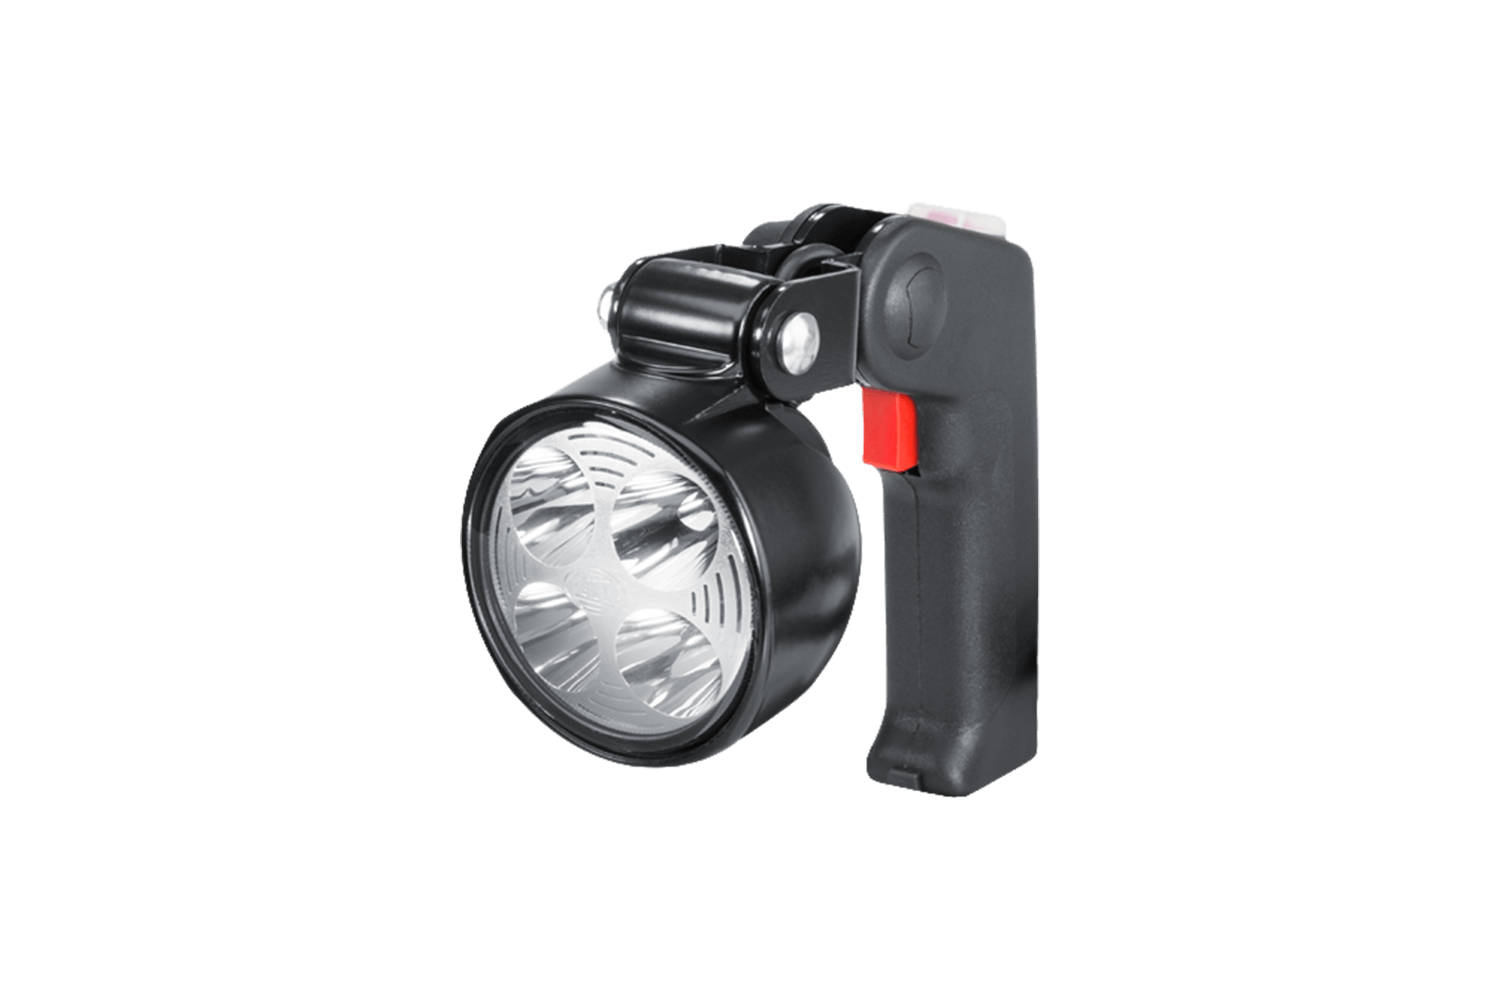 Module 70 LED handheld search lamp from Hella offered by Patlon